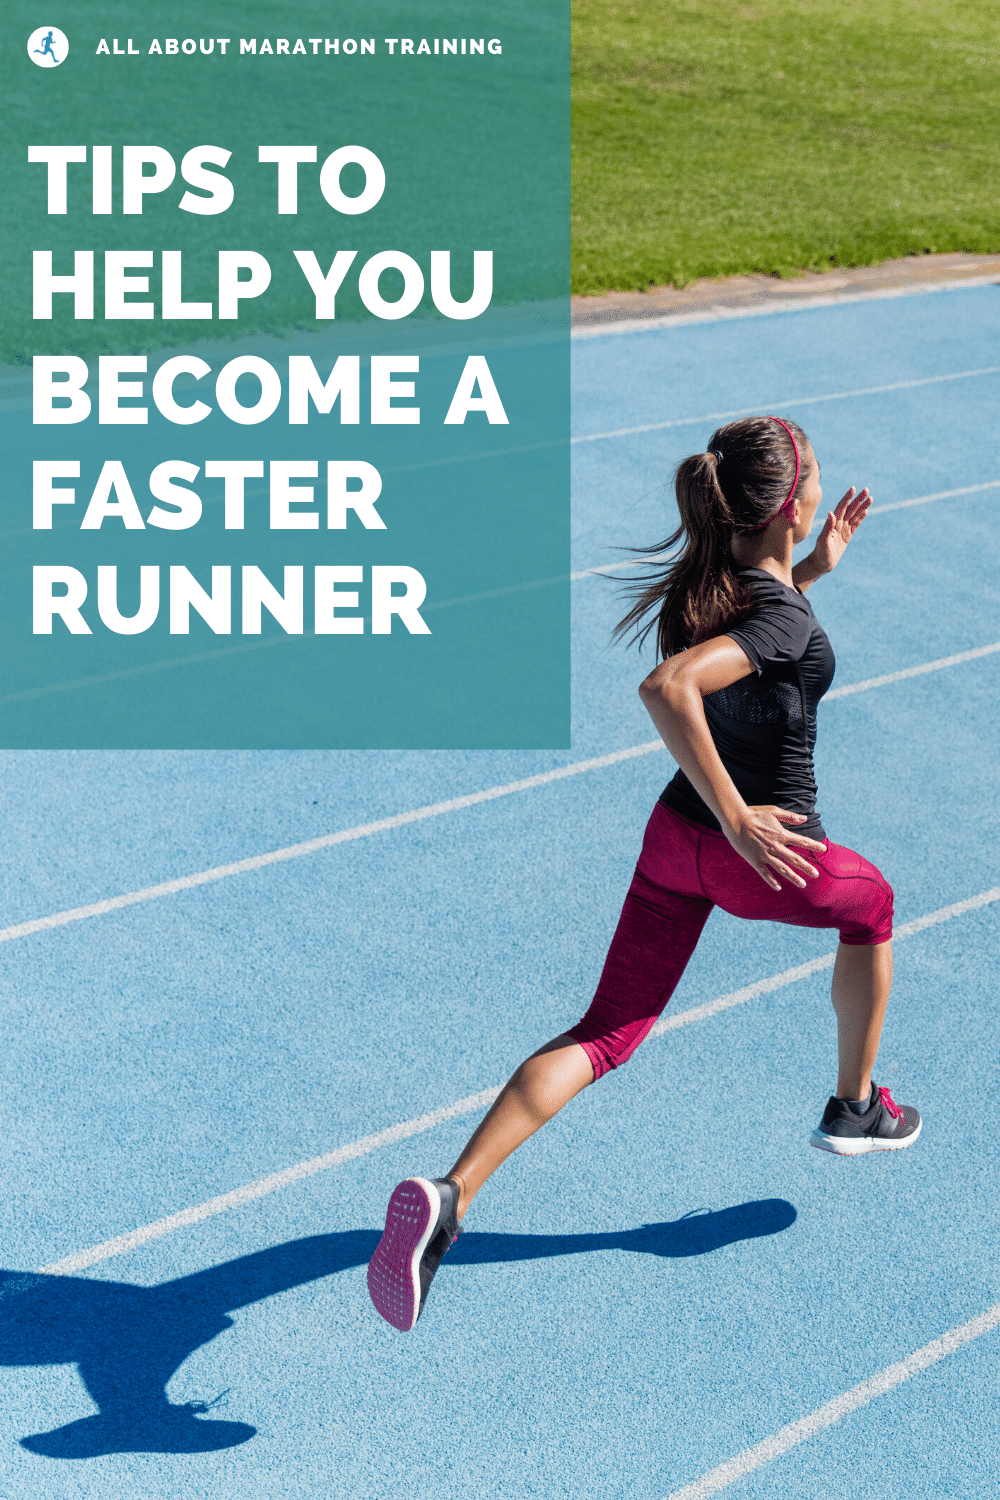 5 Running Workouts You Can Do to Increase Your Speed!